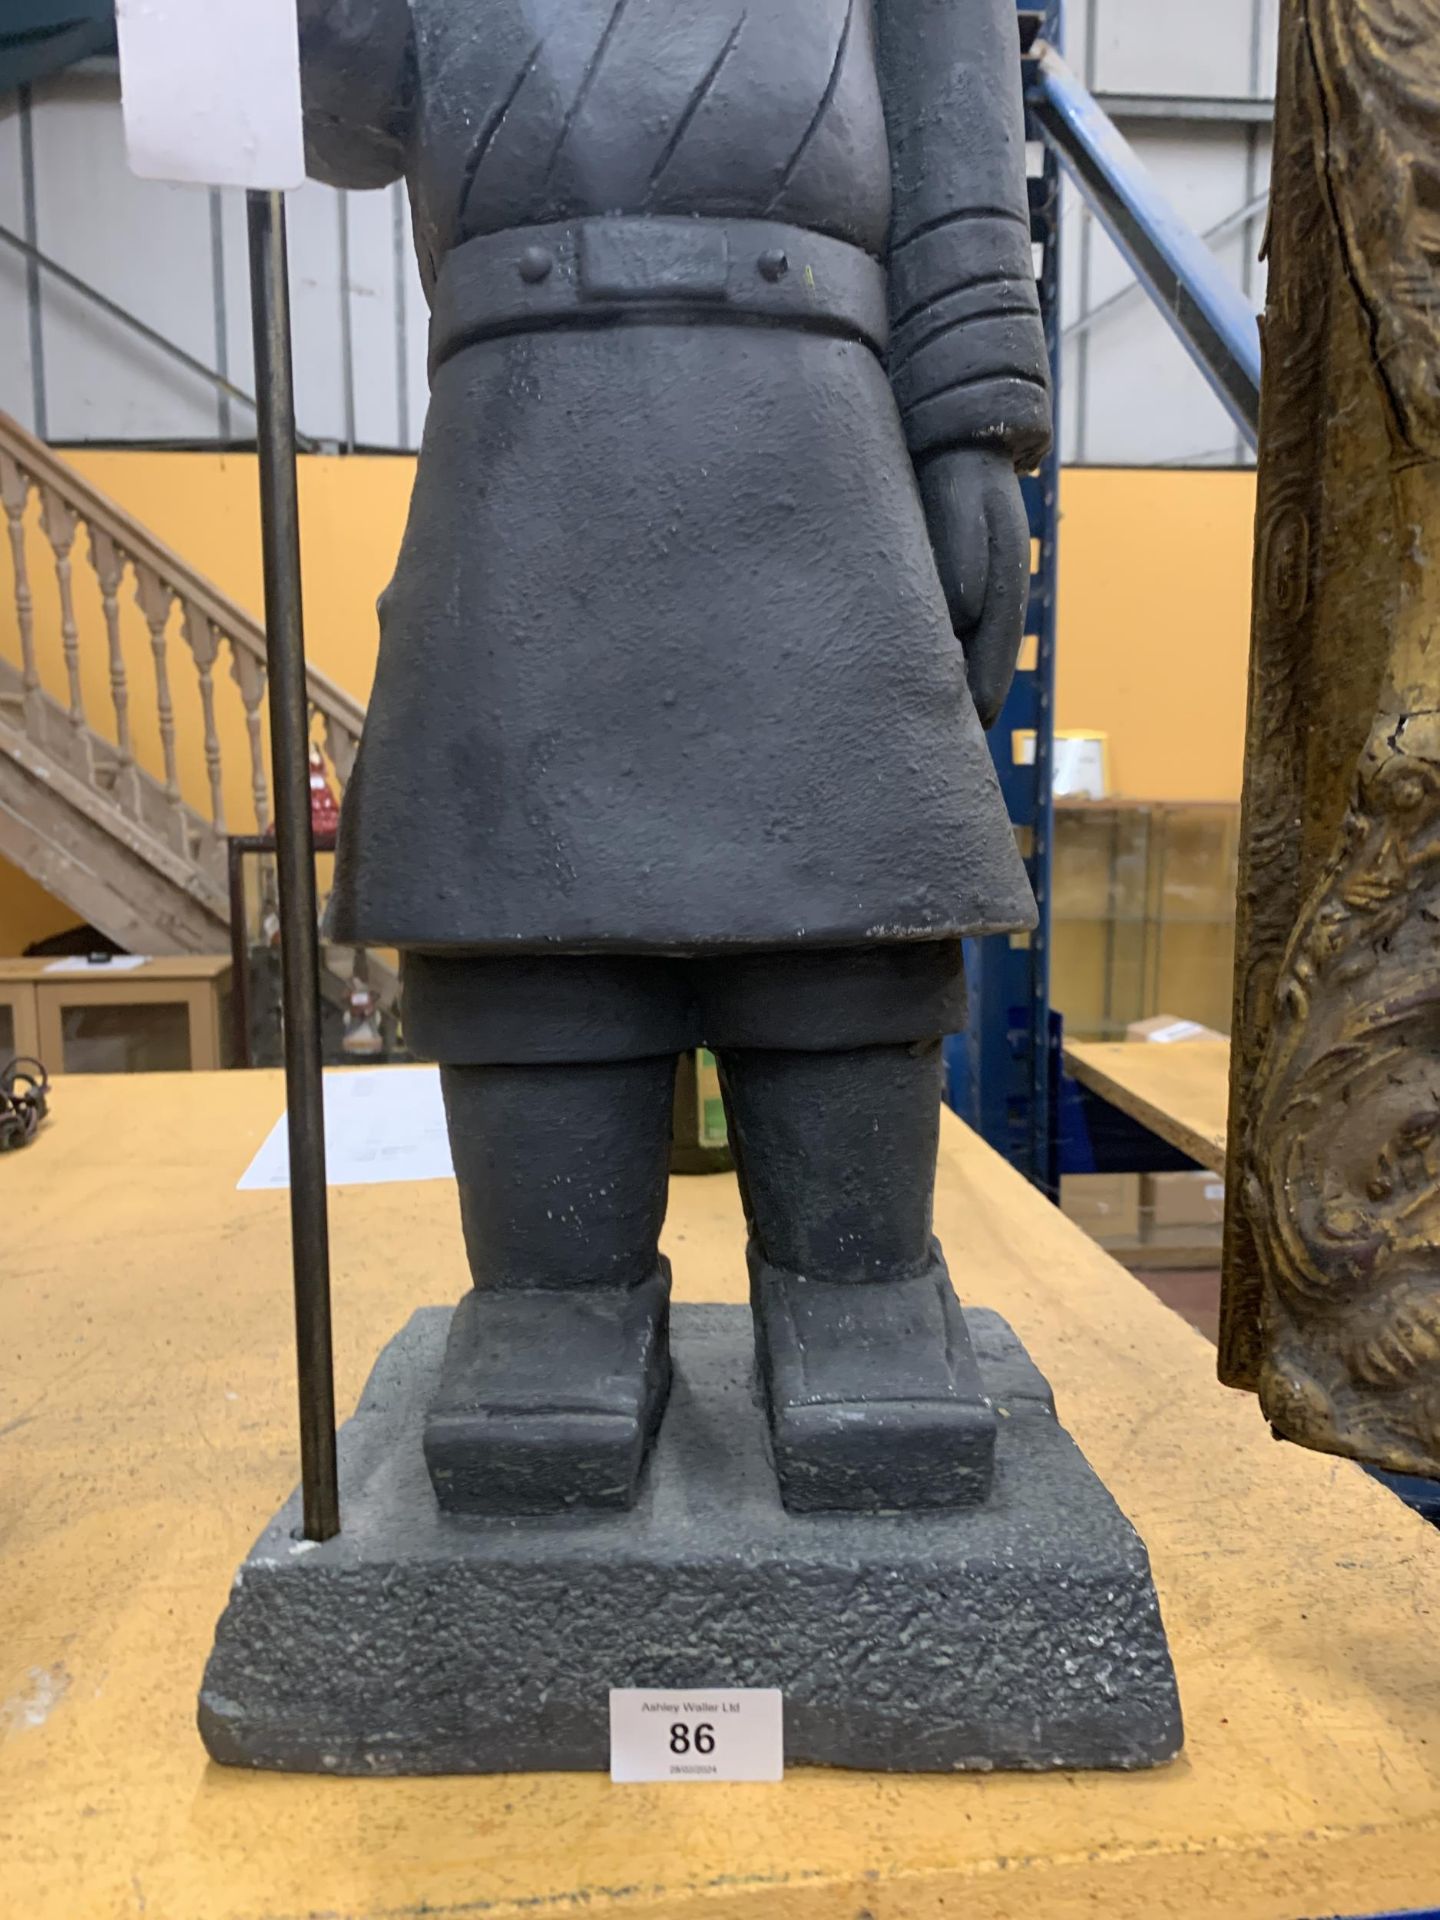 A MODEL OF A SAMURI WARRIOR APPROXIMATELY 70CM TALL - Image 3 of 5